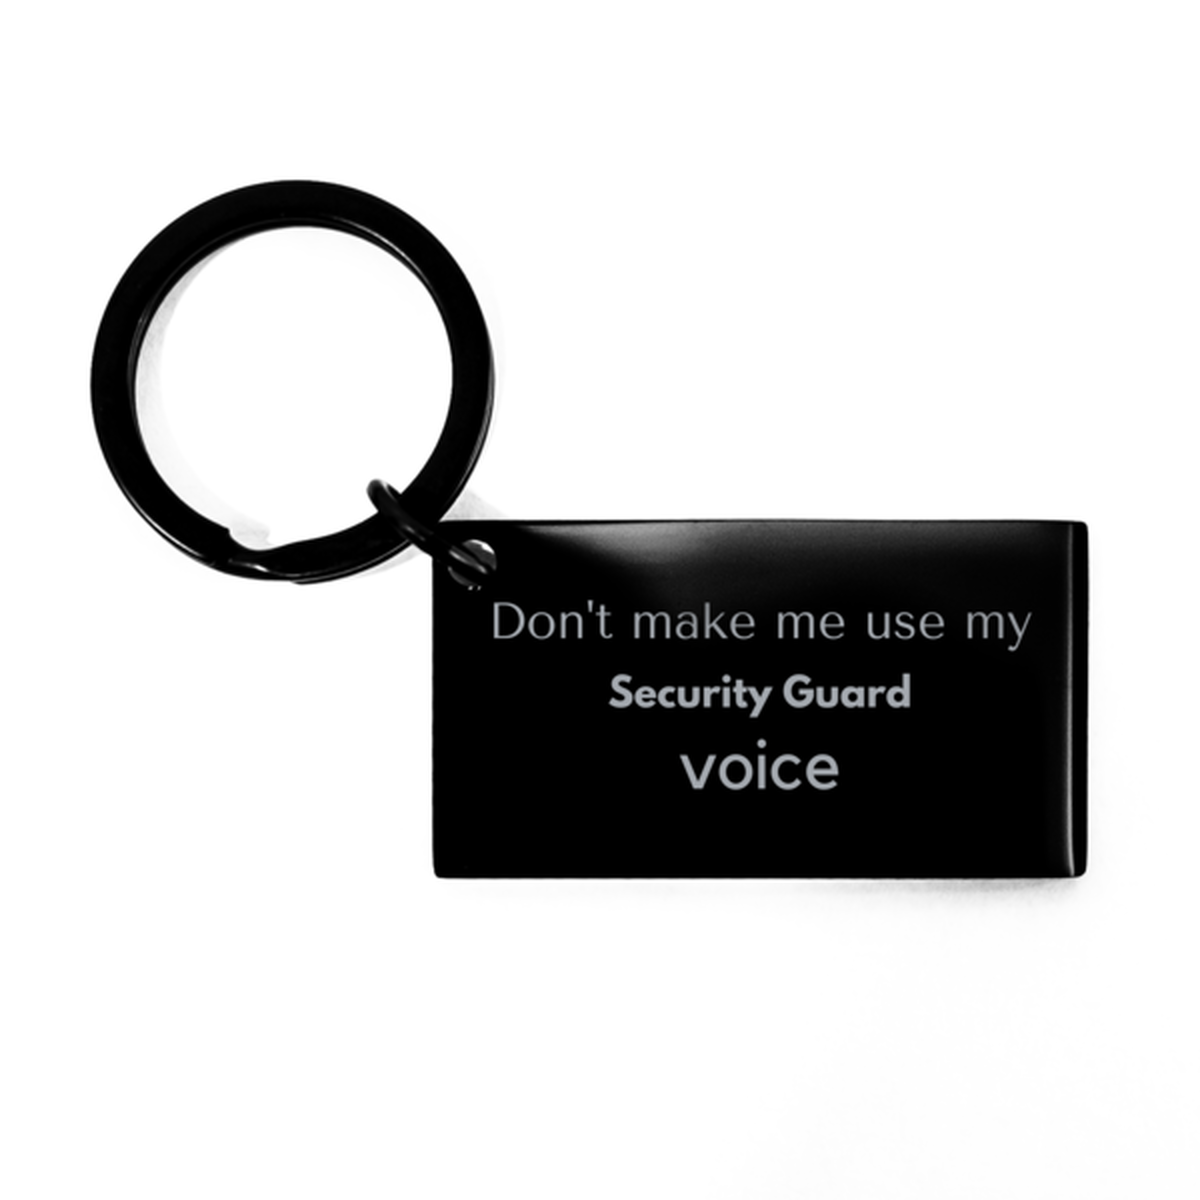 Don't make me use my Security Guard voice, Sarcasm Security Guard Gifts, Christmas Security Guard Keychain Birthday Unique Gifts For Security Guard Coworkers, Men, Women, Colleague, Friends